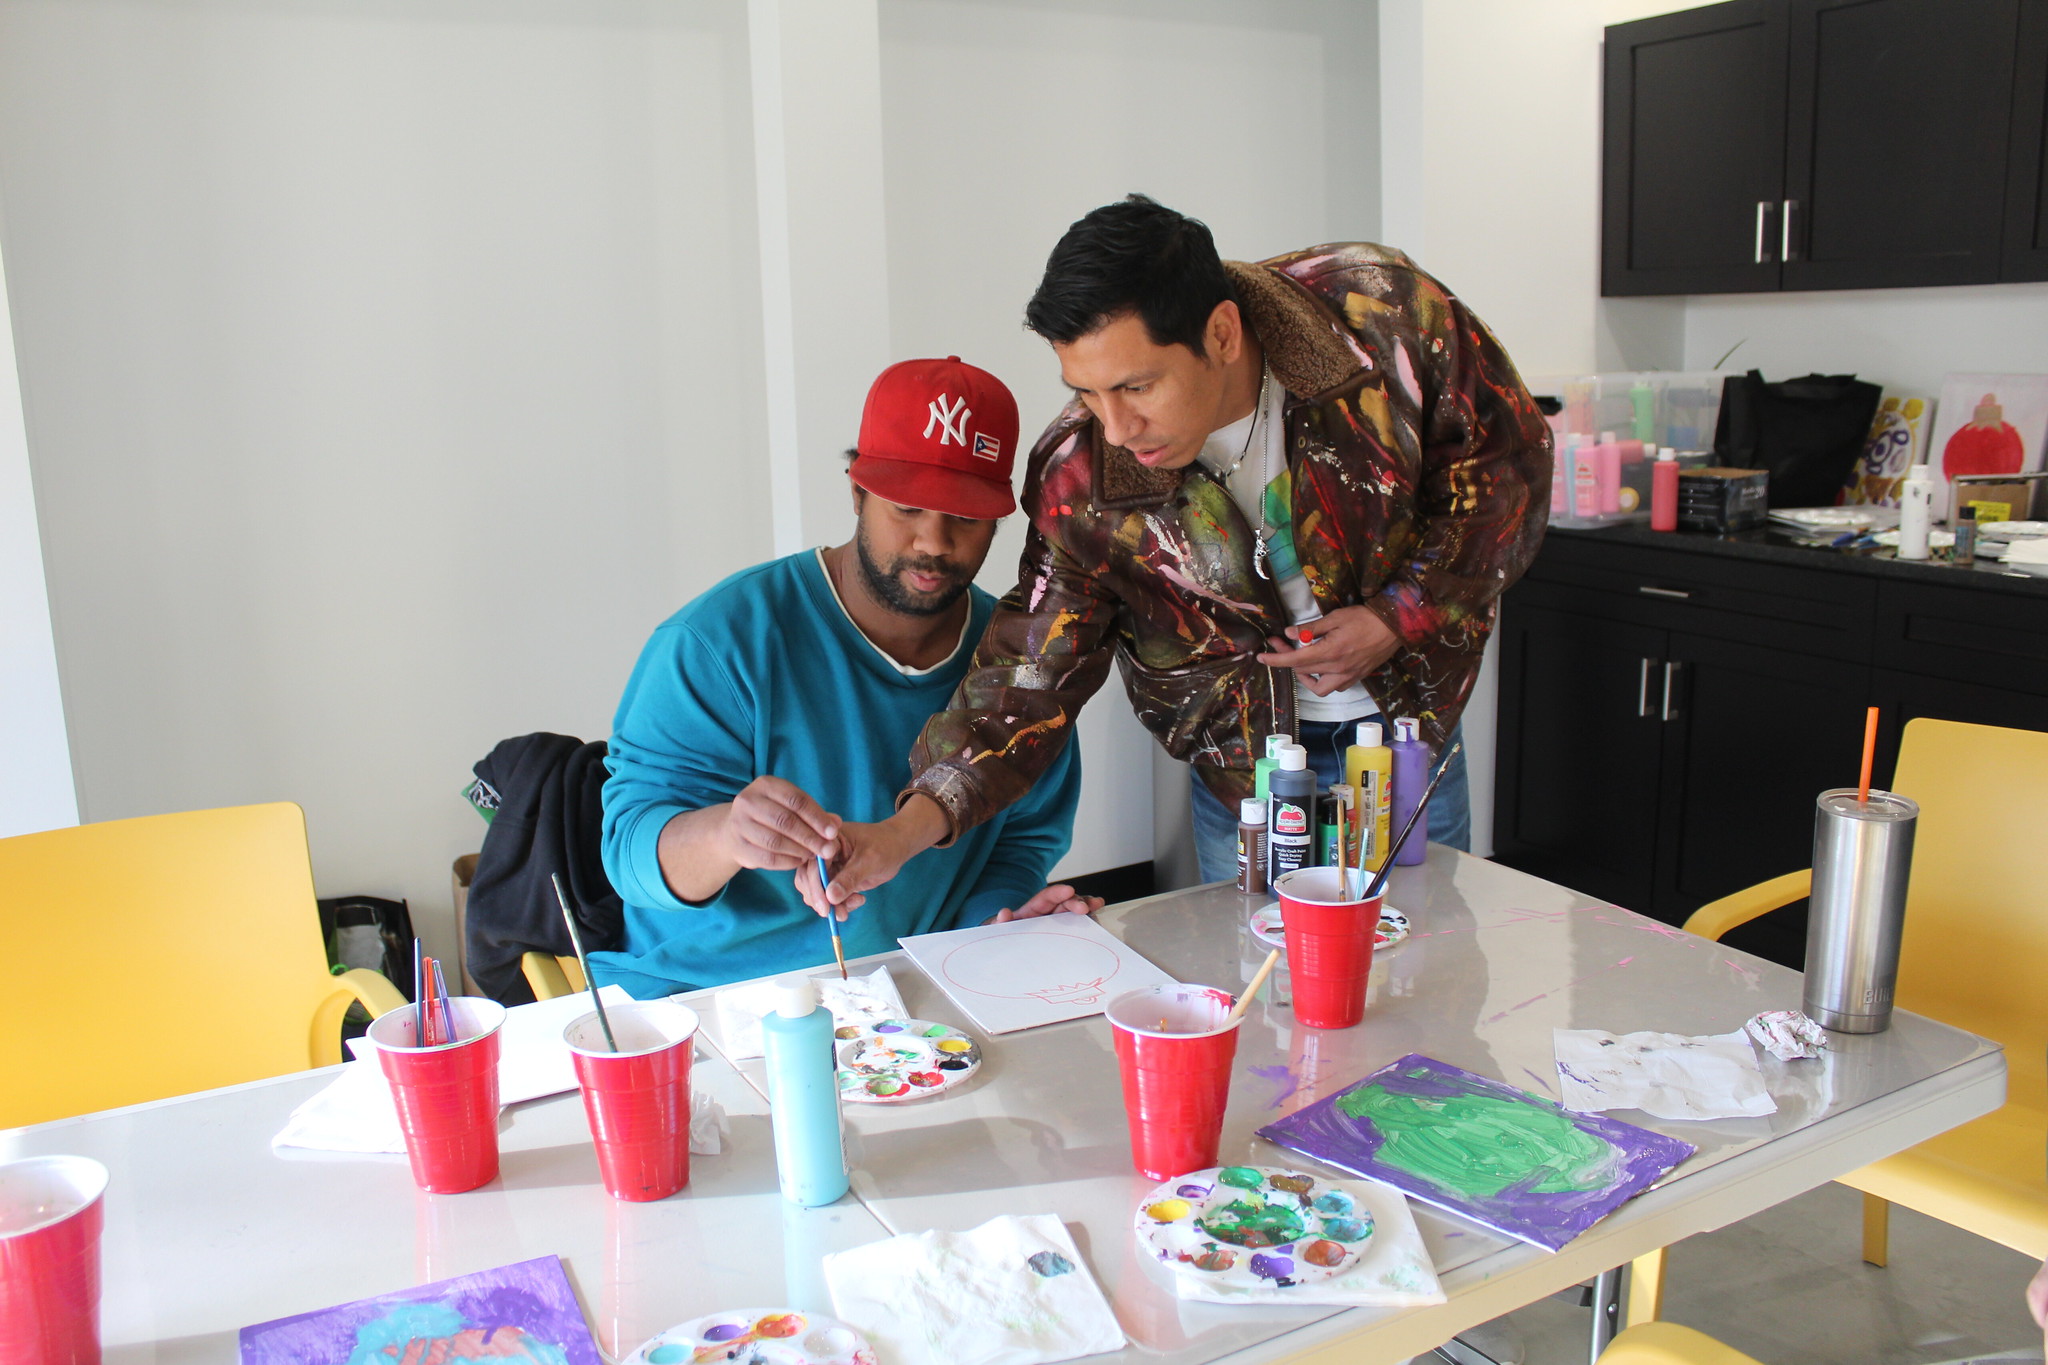 Muralist Rene Soto works with a student